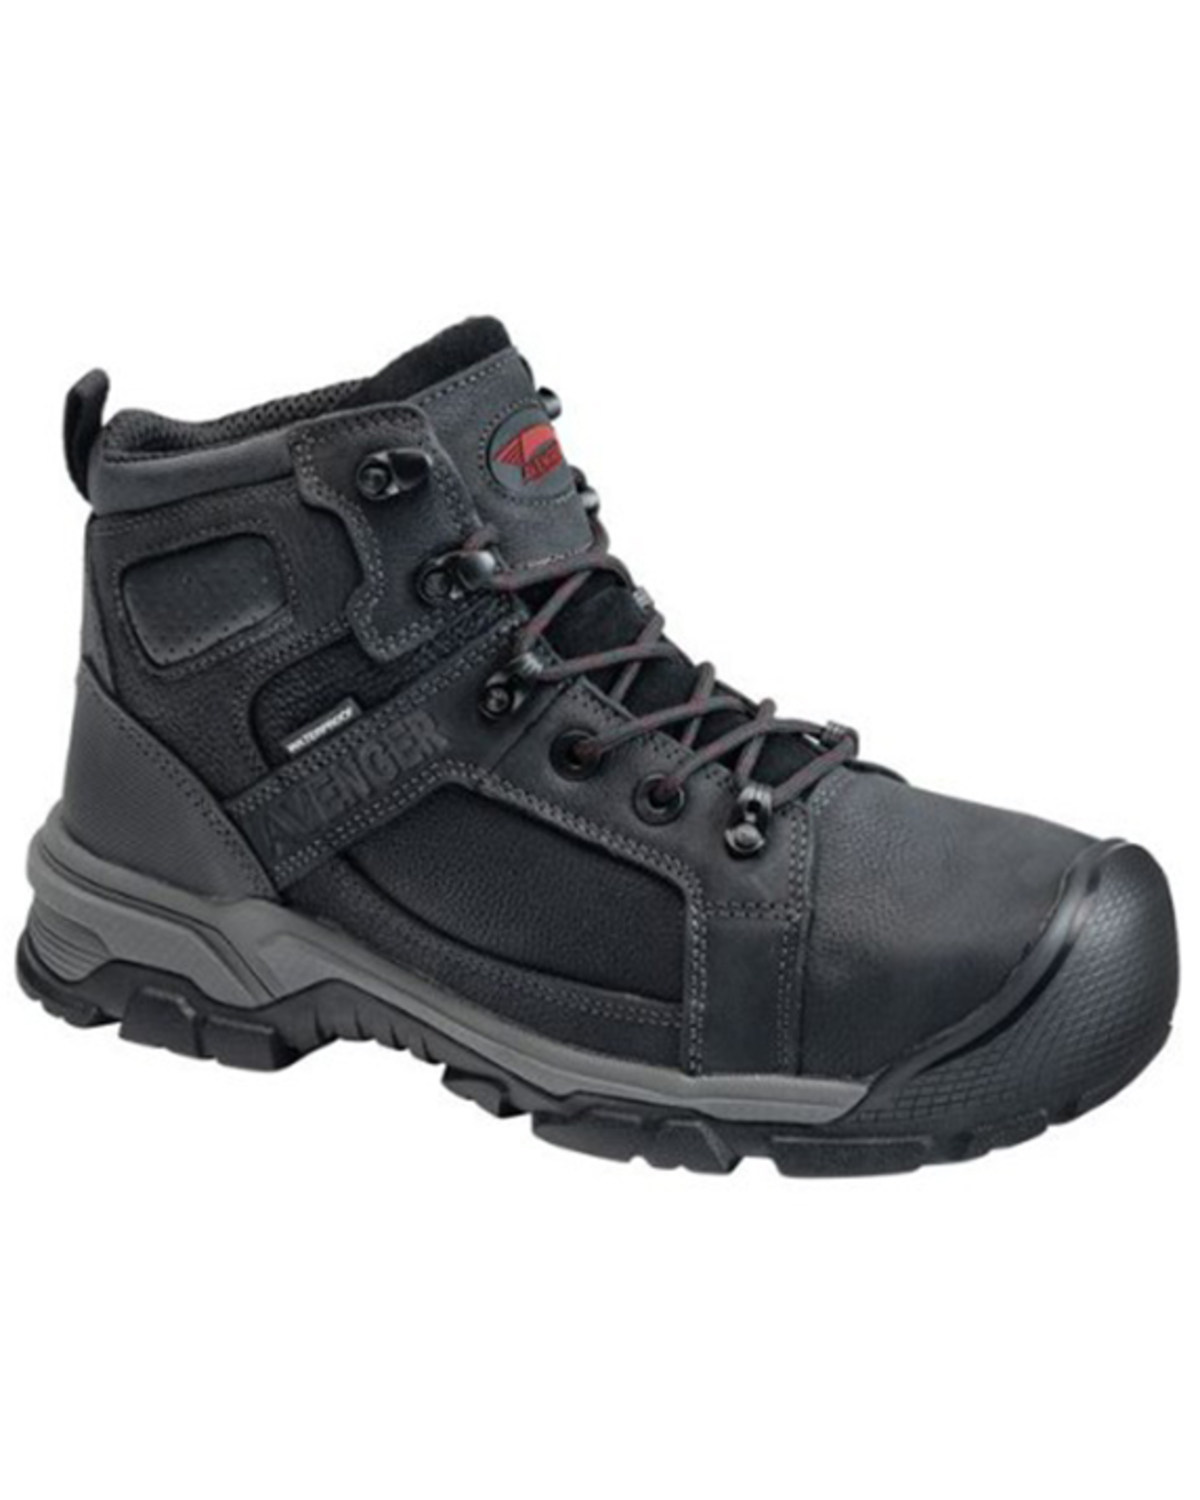 Avenger Men's Ripsaw Industrial 4.5" Lace-Up Mid Work Boots - Carbon Toe